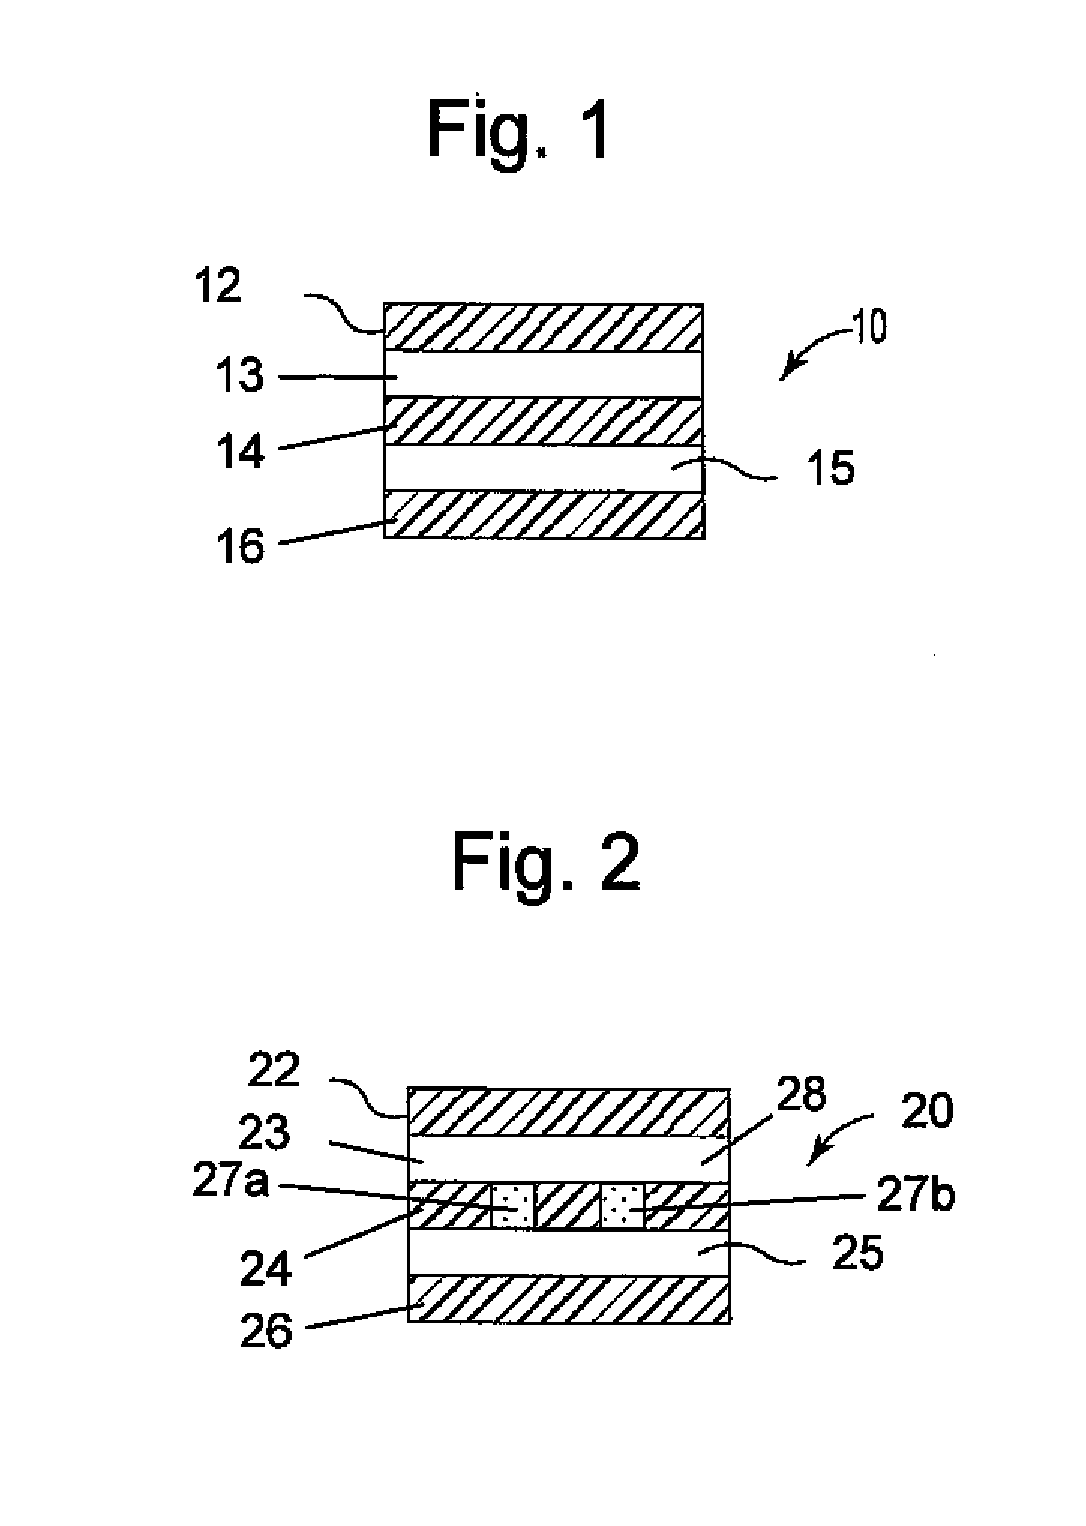 Pelvic implant and therapeutic agent system and method